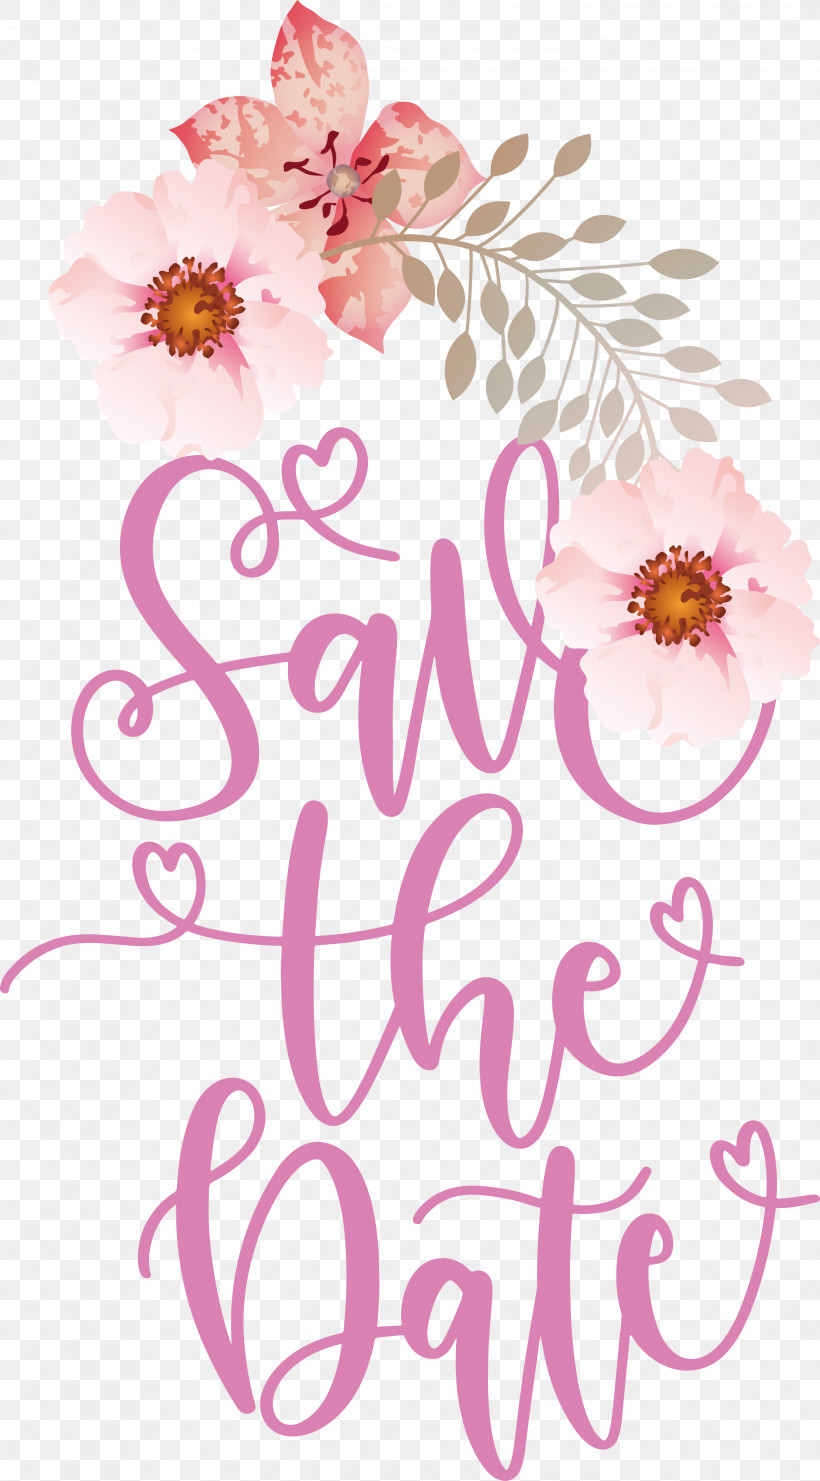 Save The Date, PNG, 2699x4876px, Floral Design, Cricut, Pdf, Save The Date, Wedding Download Free